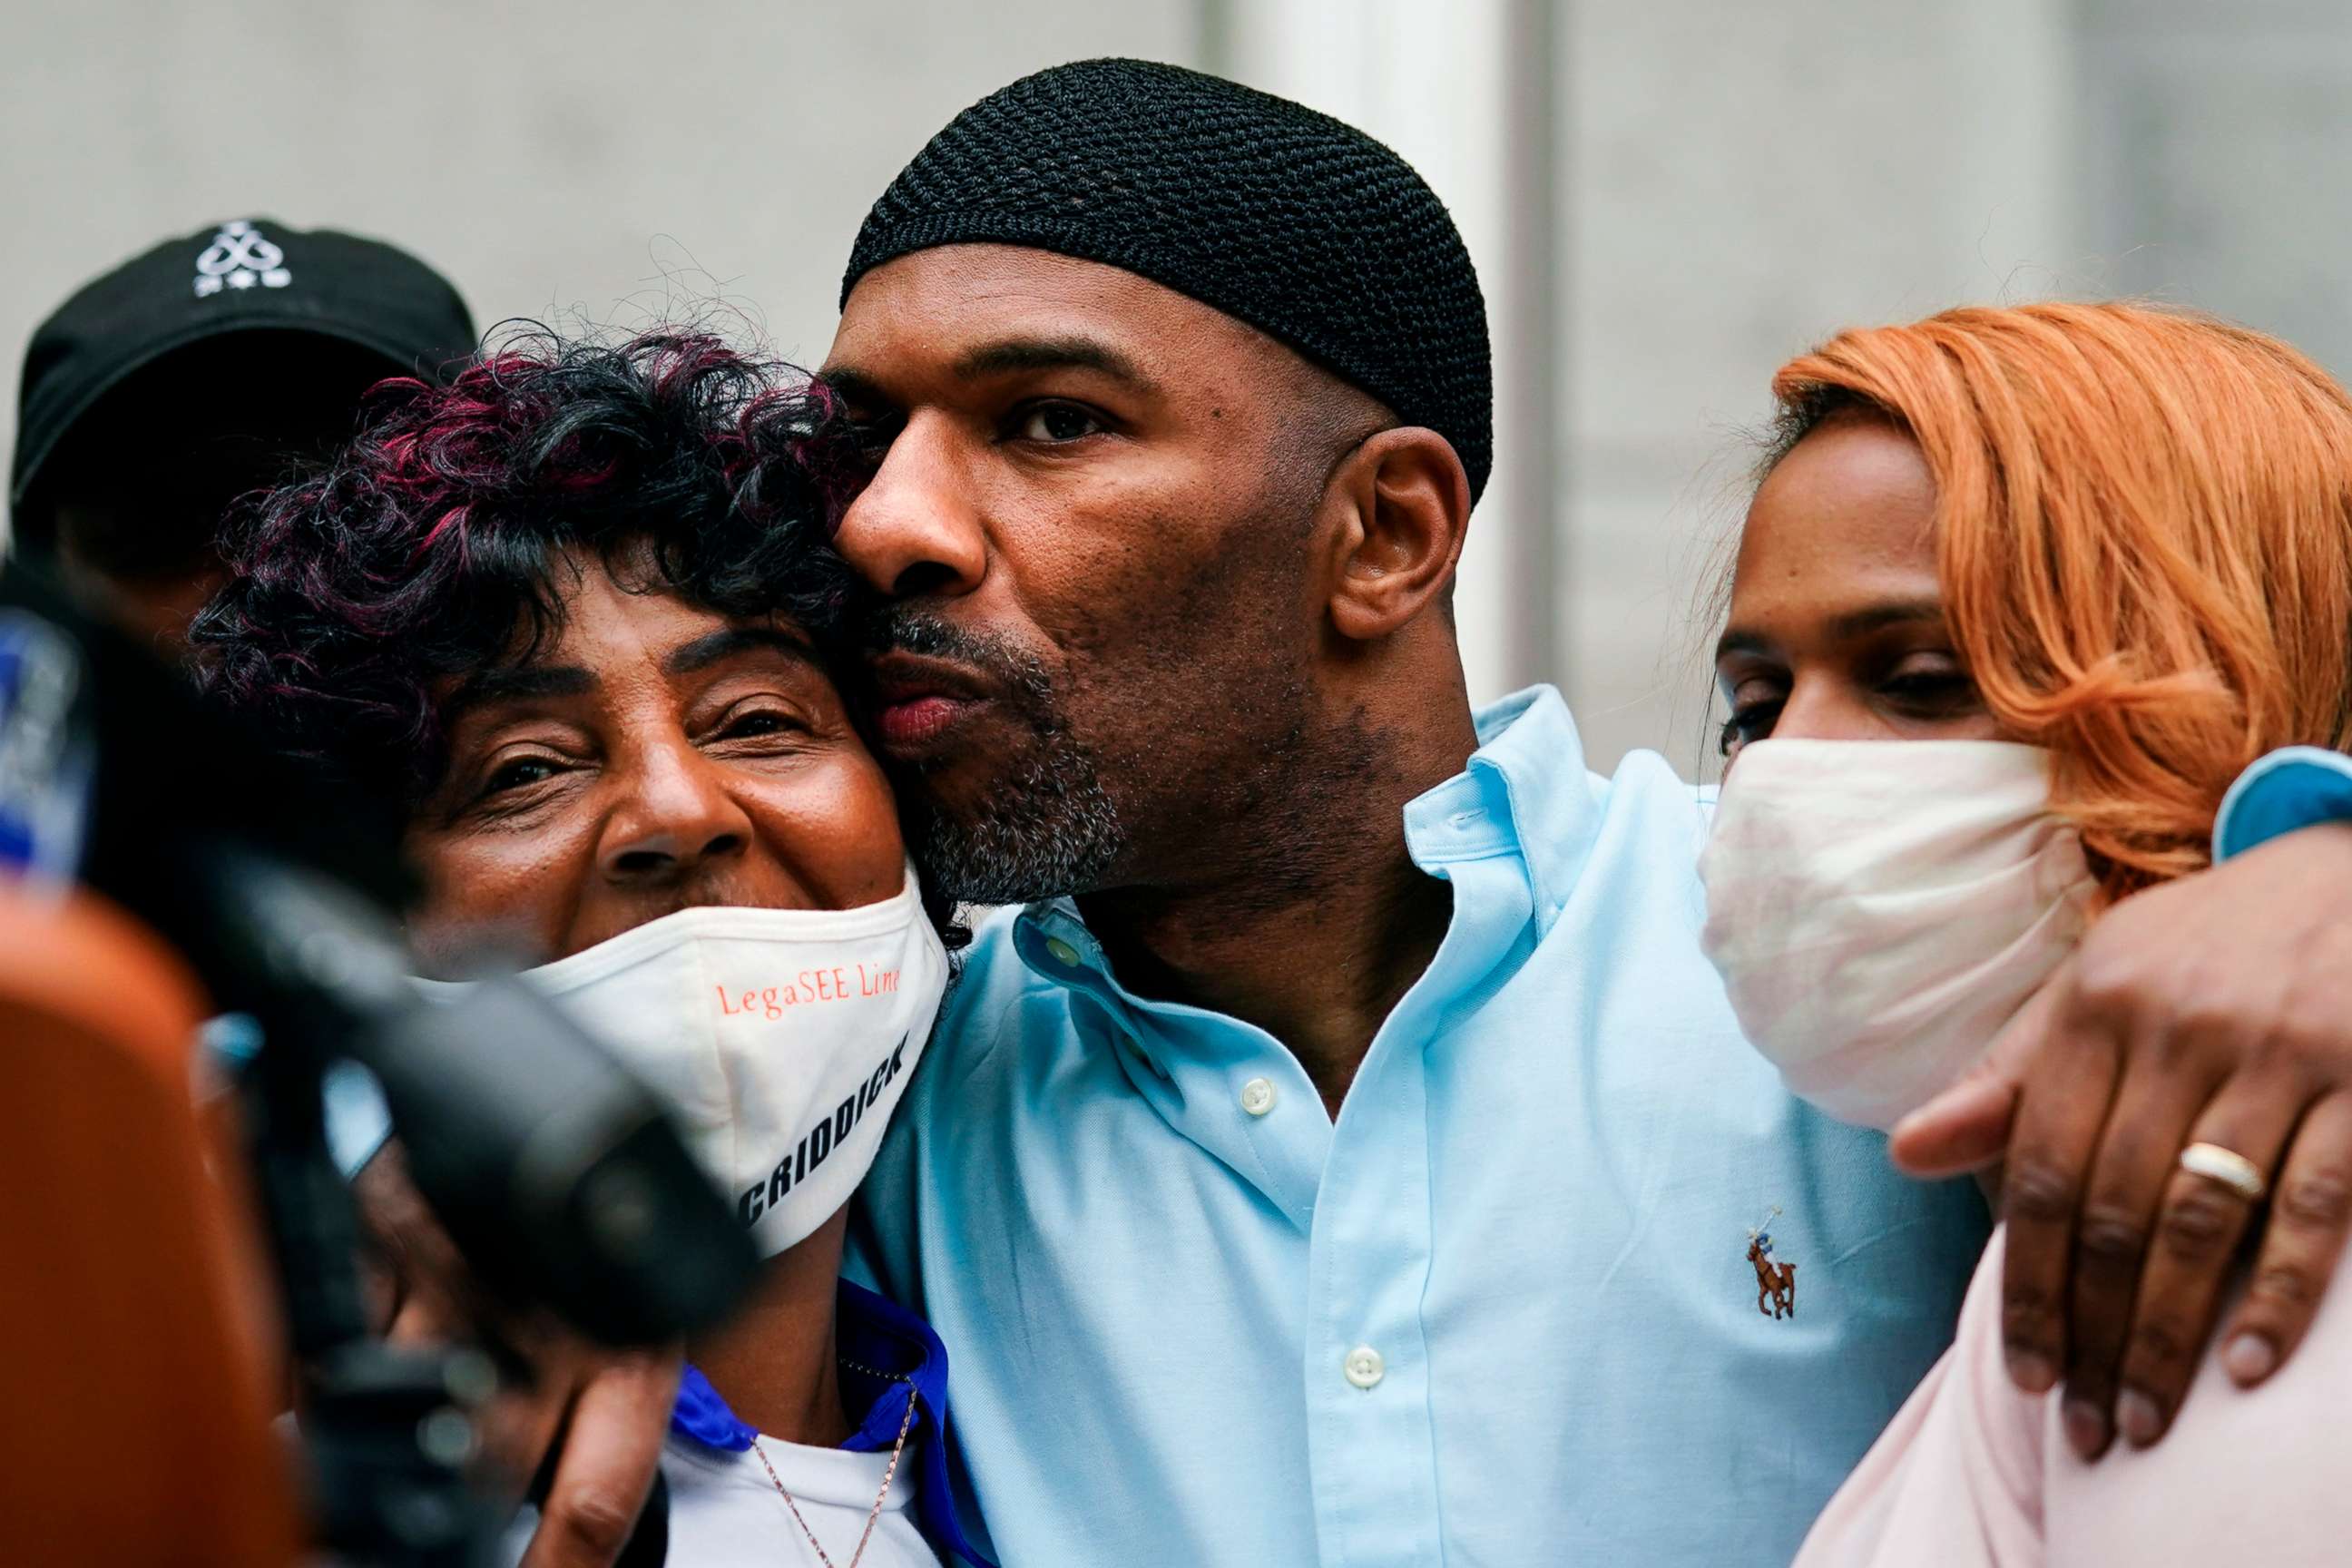 PHOTO: Eric Riddick, center, embraces his mother Christine Riddick, left, and wife Dana Baker-Riddick as they listen during a news conference in Philadelphia, Friday, May 28, 2021.